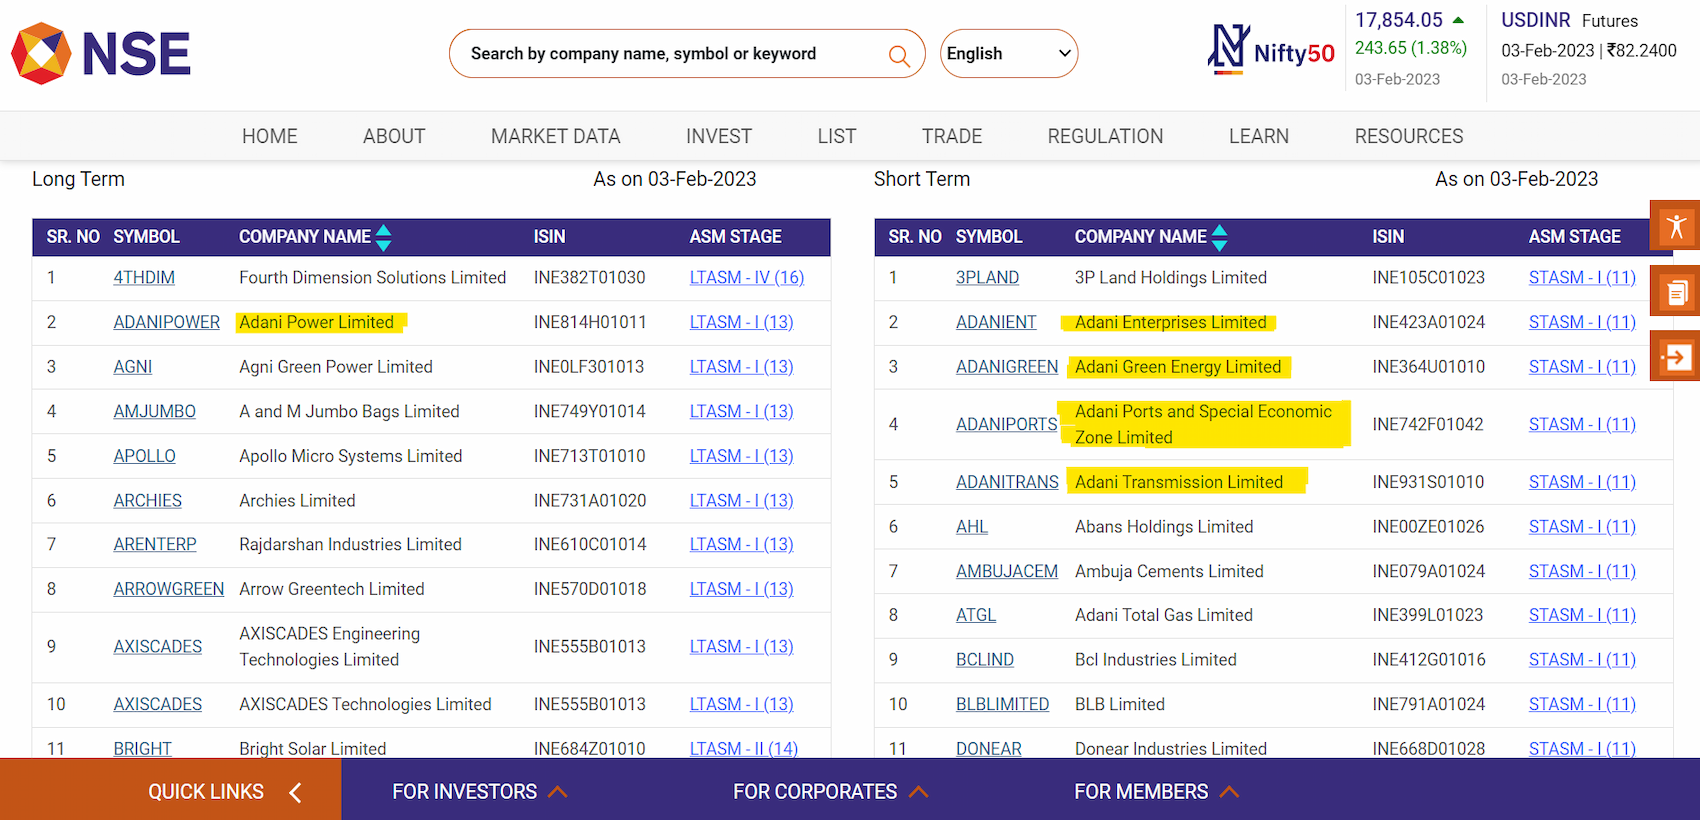 Adani Enterprises and other firms of the Adani Group are listed in the NSE ASM list